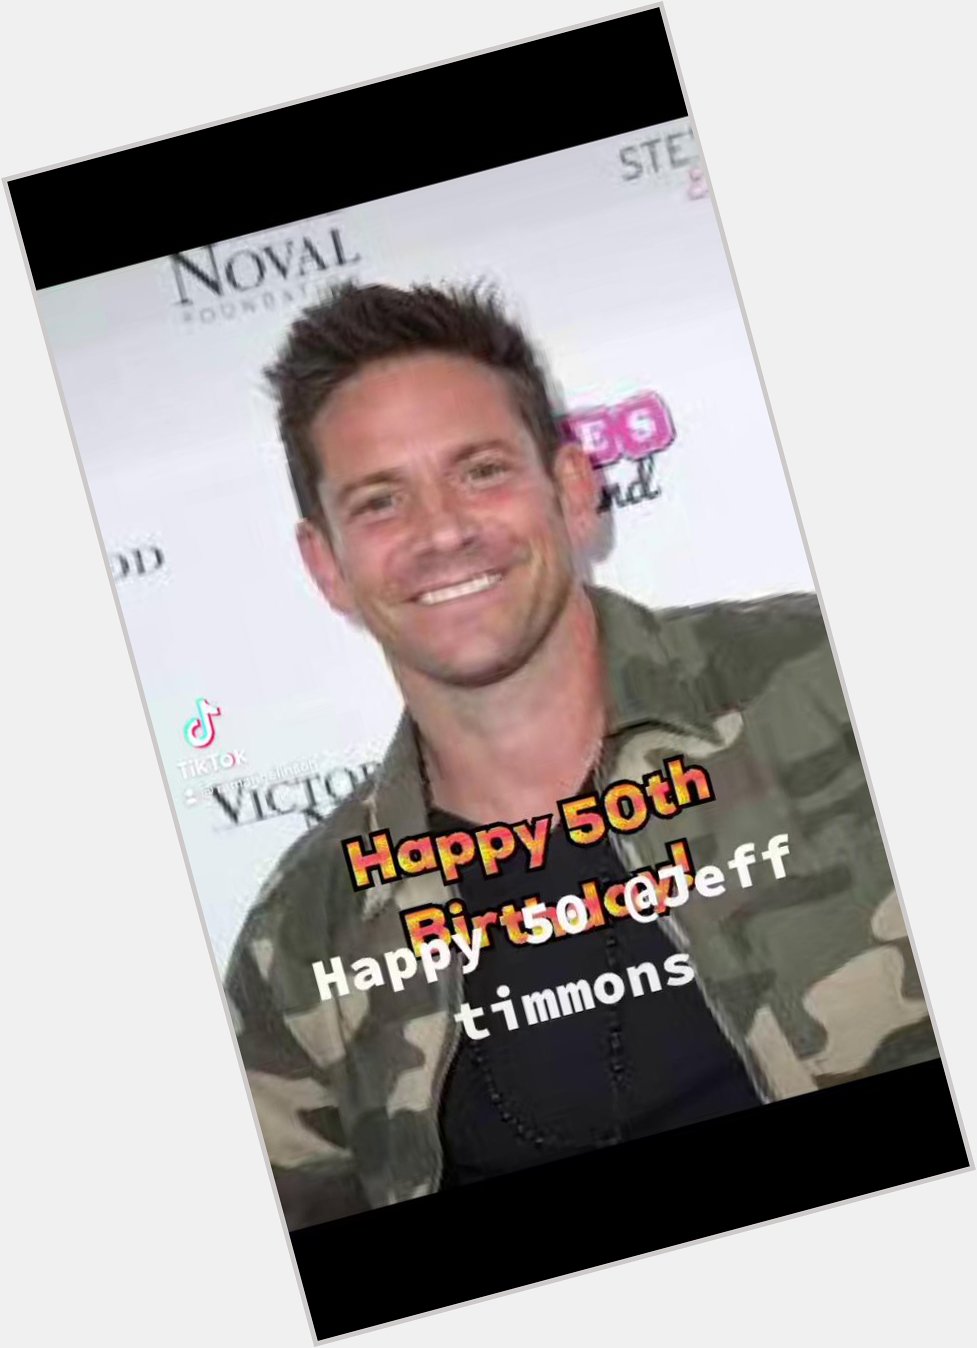 Happy birthday to Jeff timmons hope this new decade is great,  